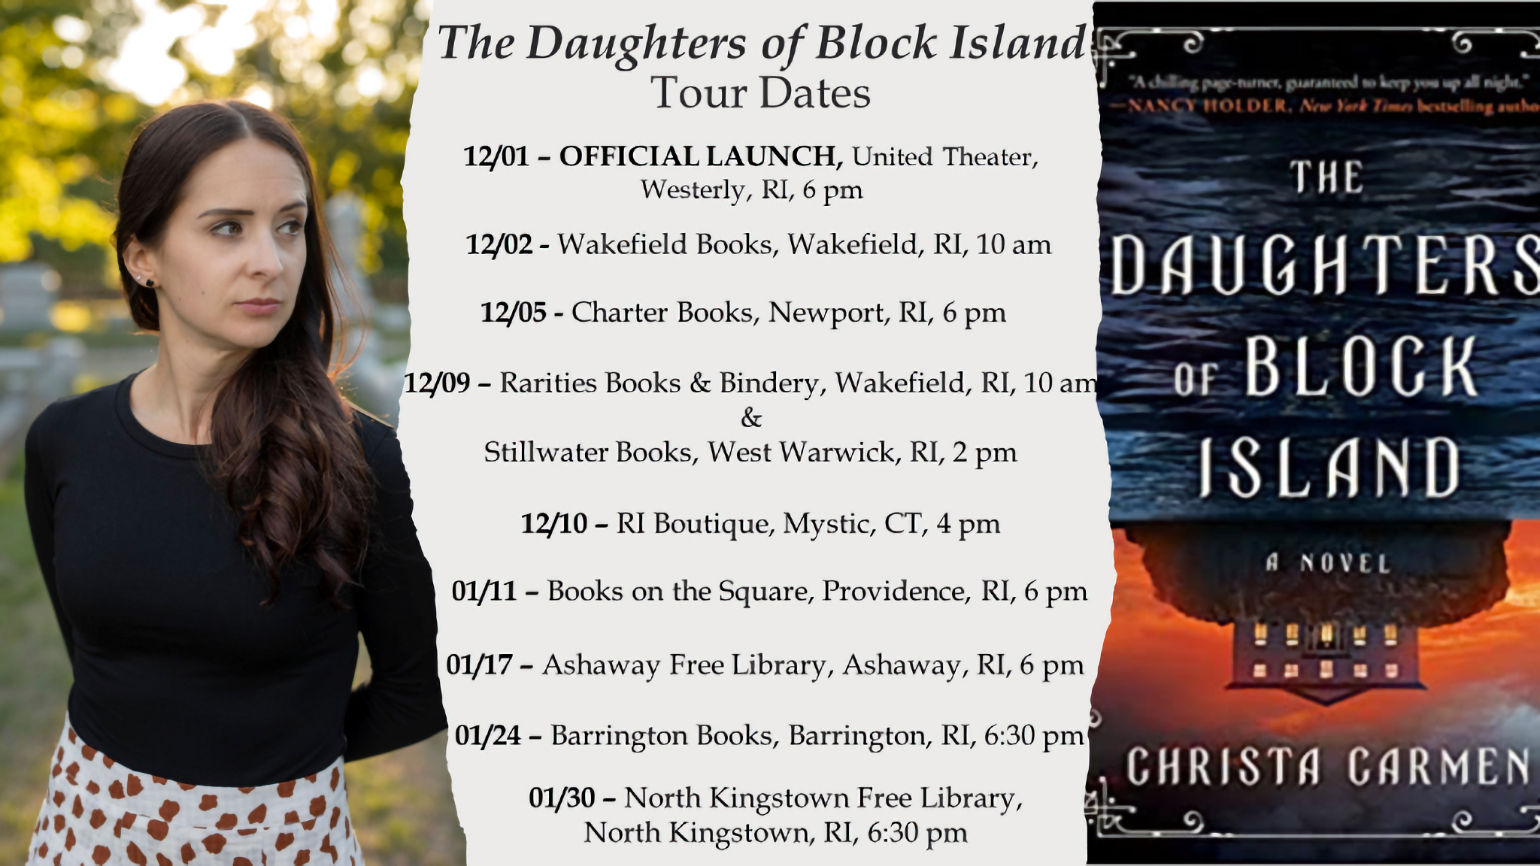 Events for The Daughters of Block Island